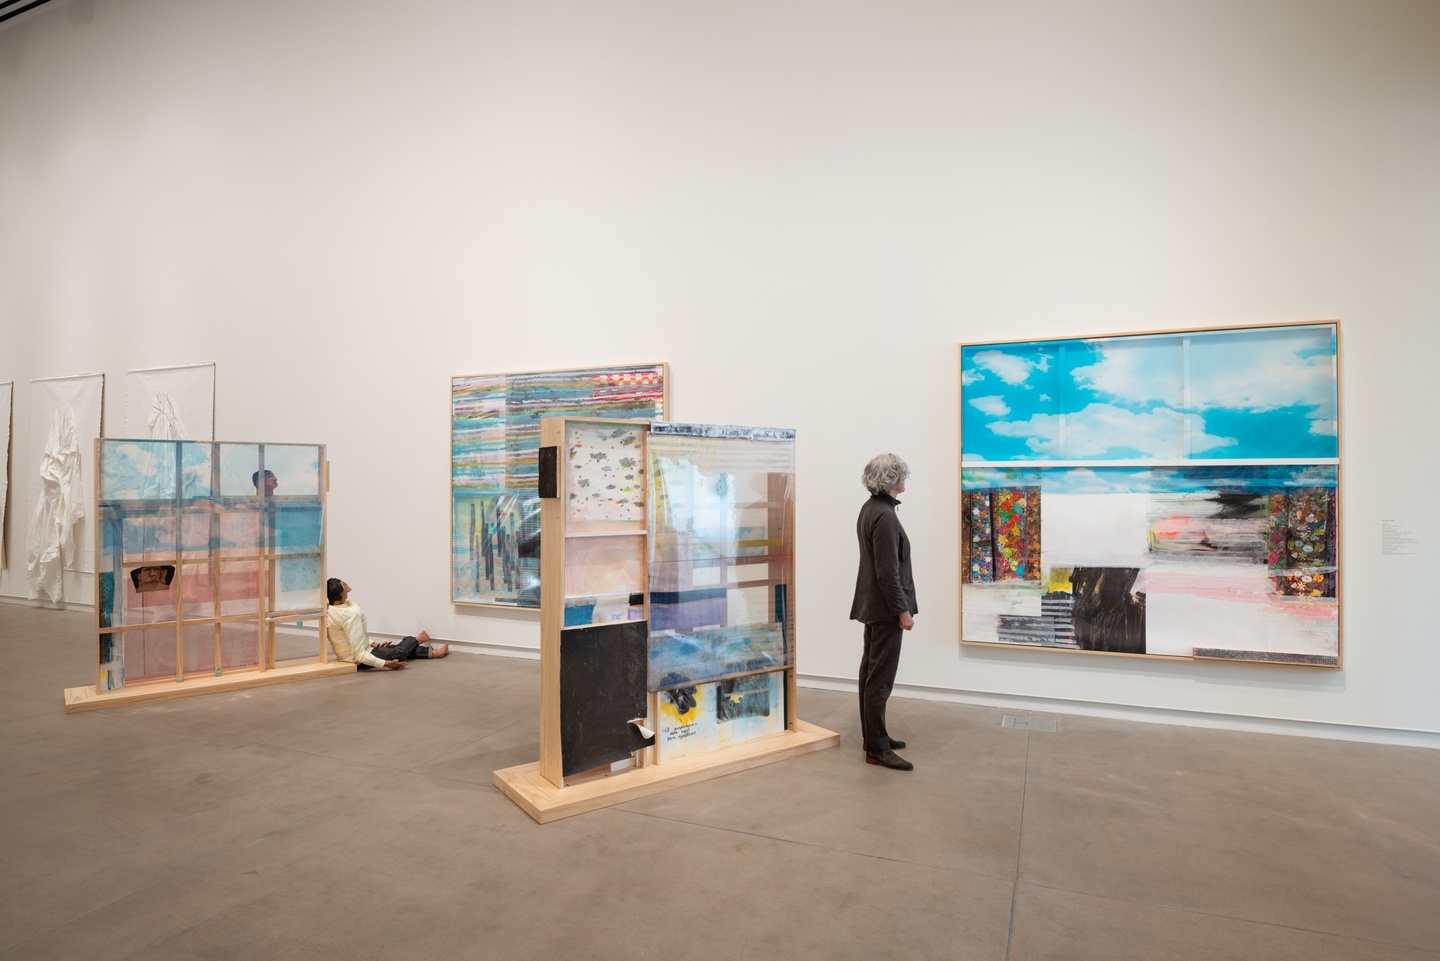 A gallery view of two large rectangular sculptures in front of two wooden frames with an assemblage of materials